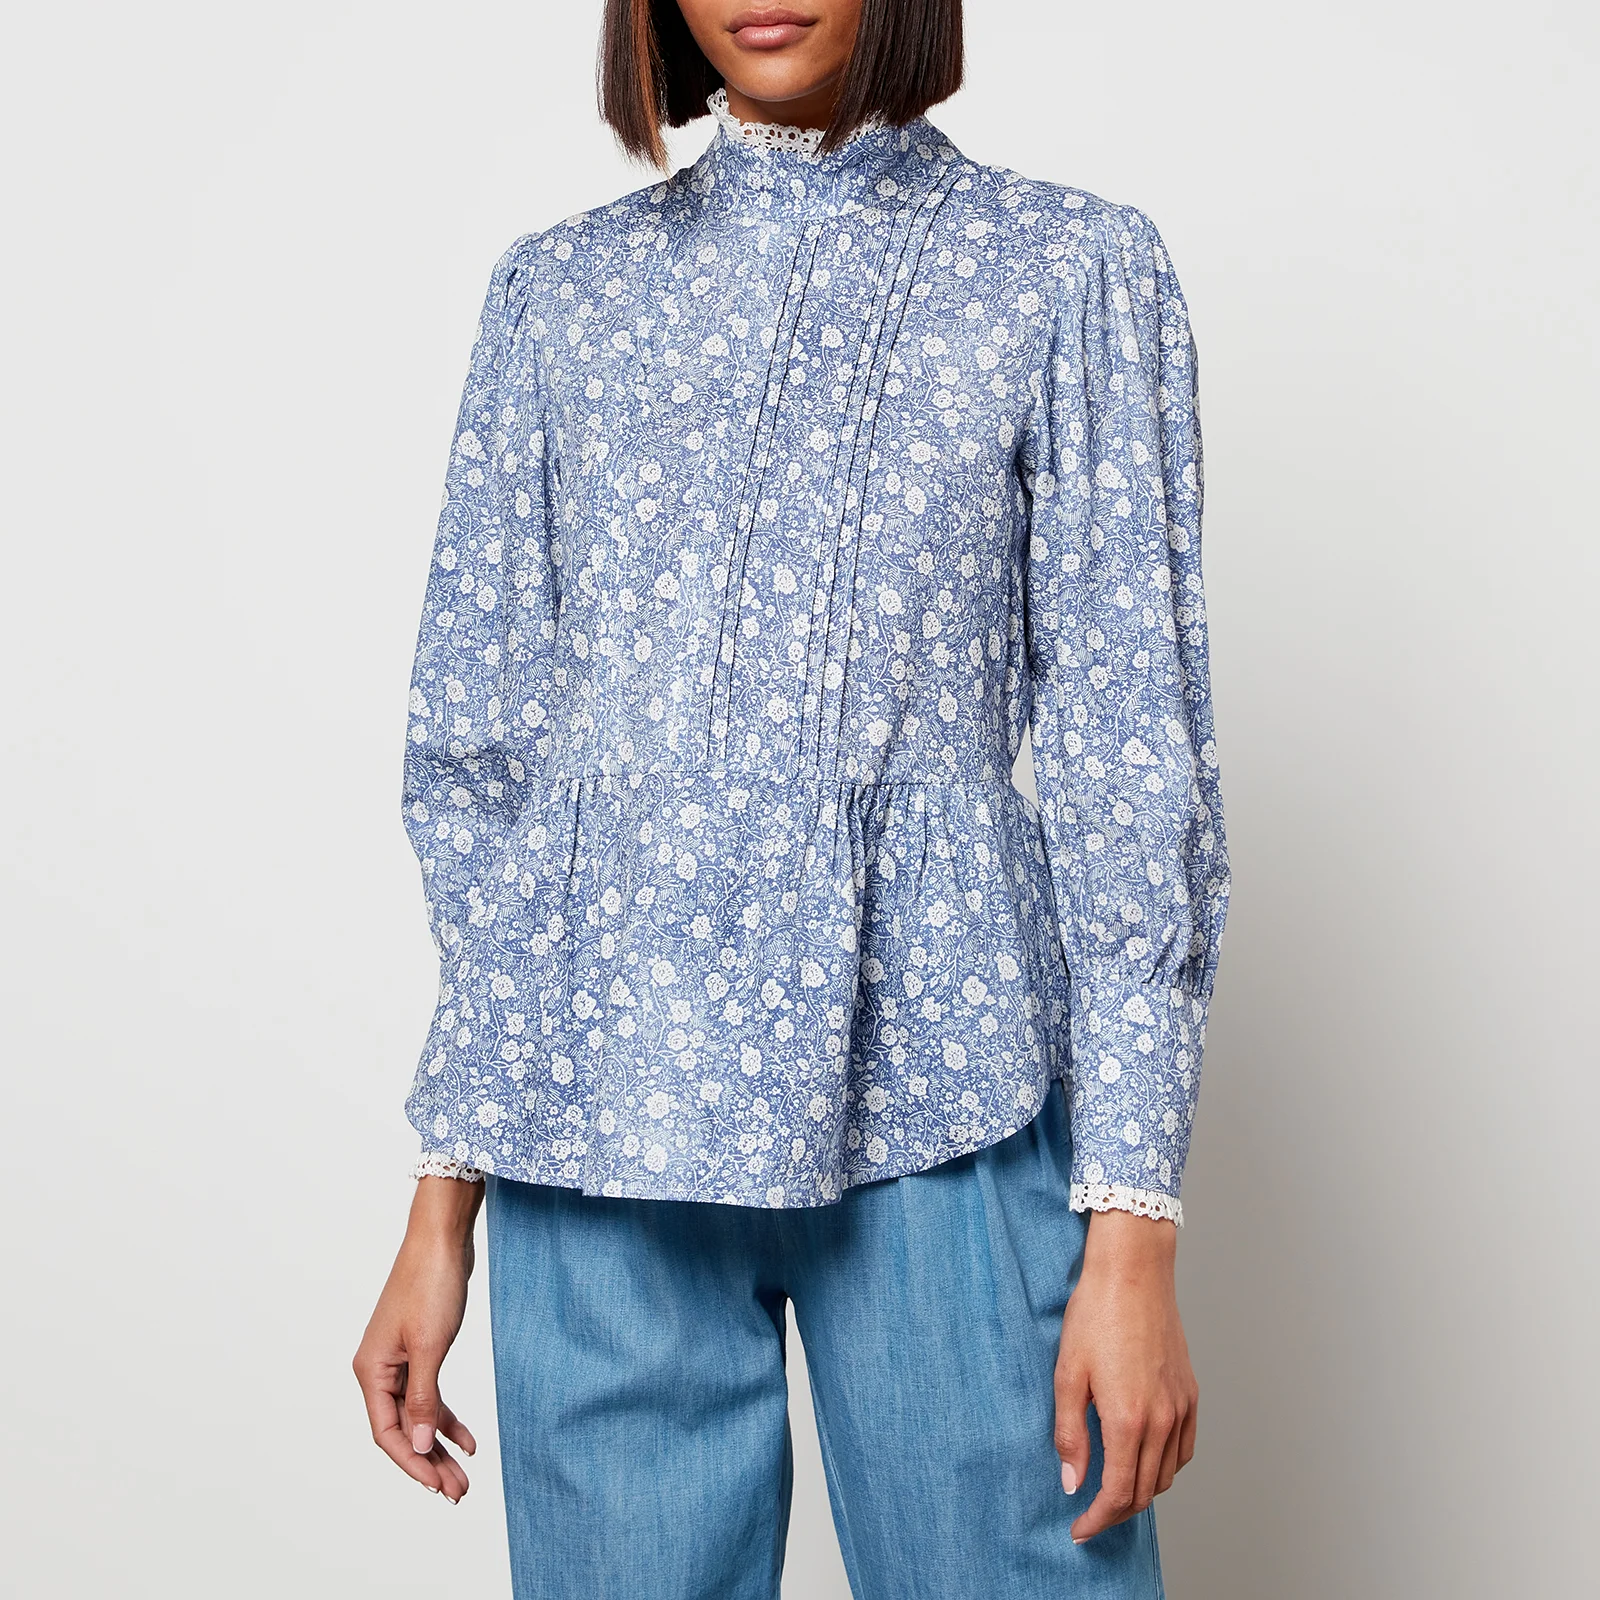 See By Chloe Women's High Neck Floral Blouse - Blue White Image 1